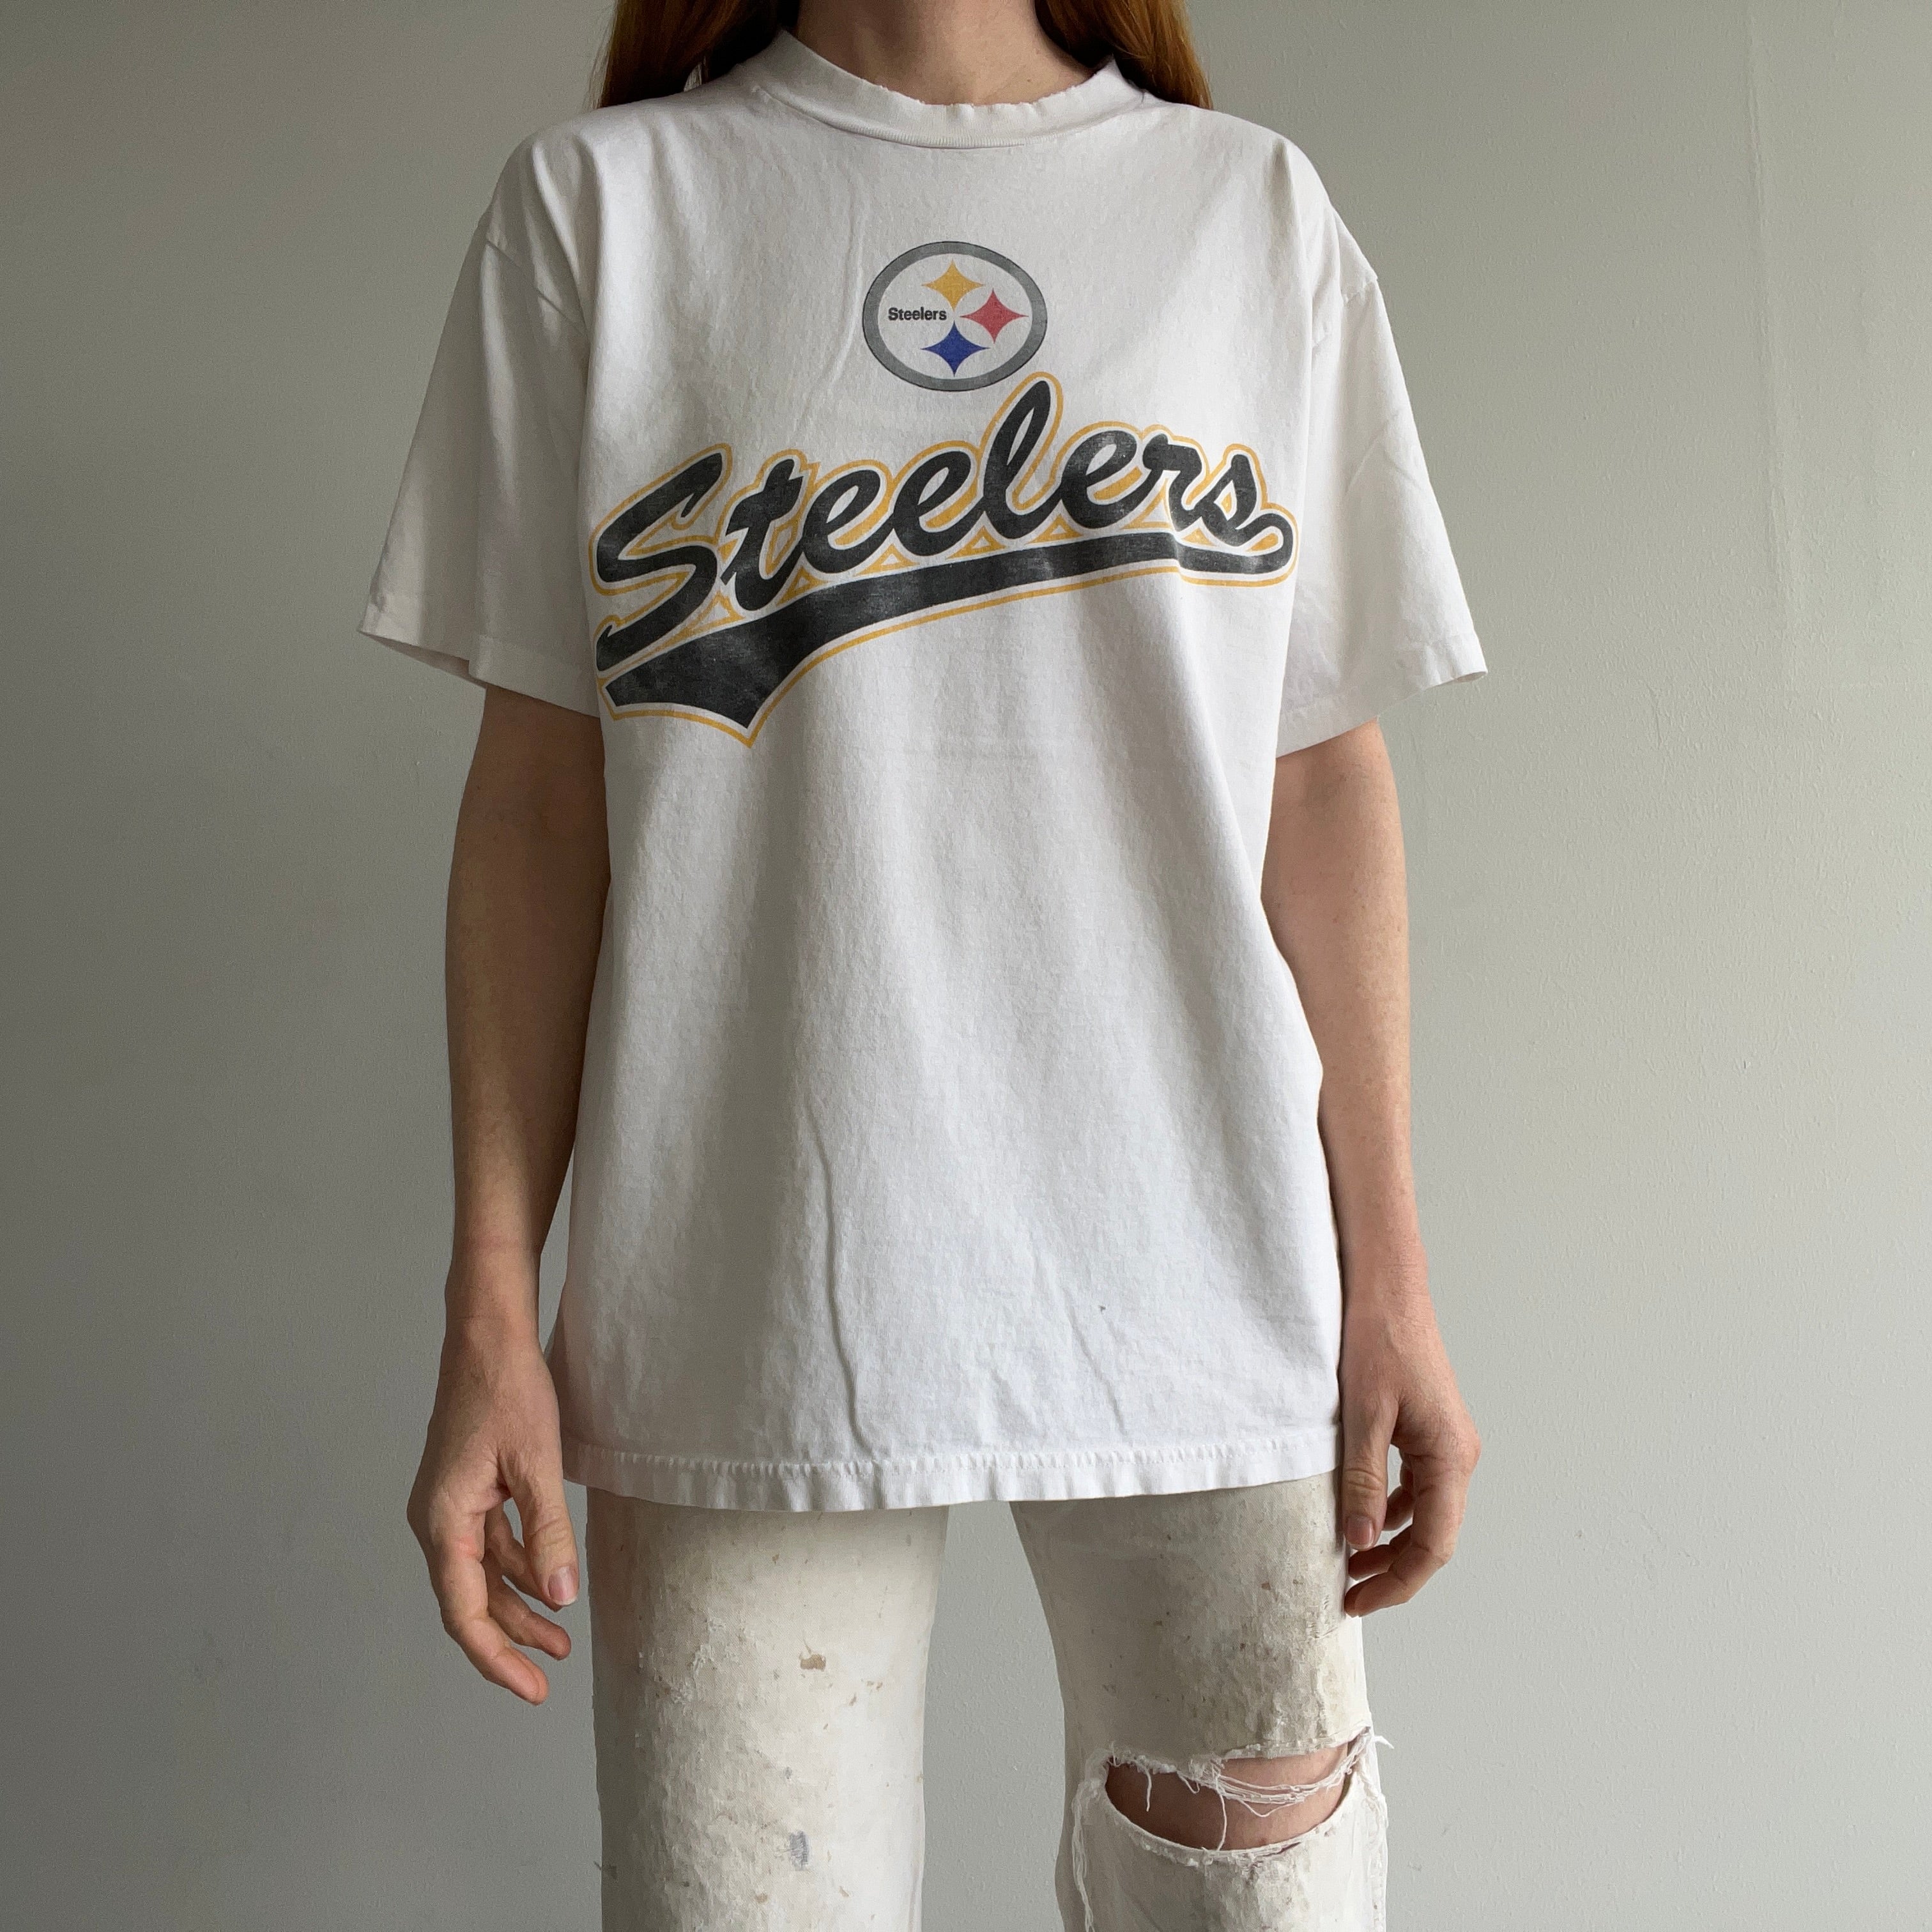 1990s Perfectly Tattered and Worn Steelers T-Shirt